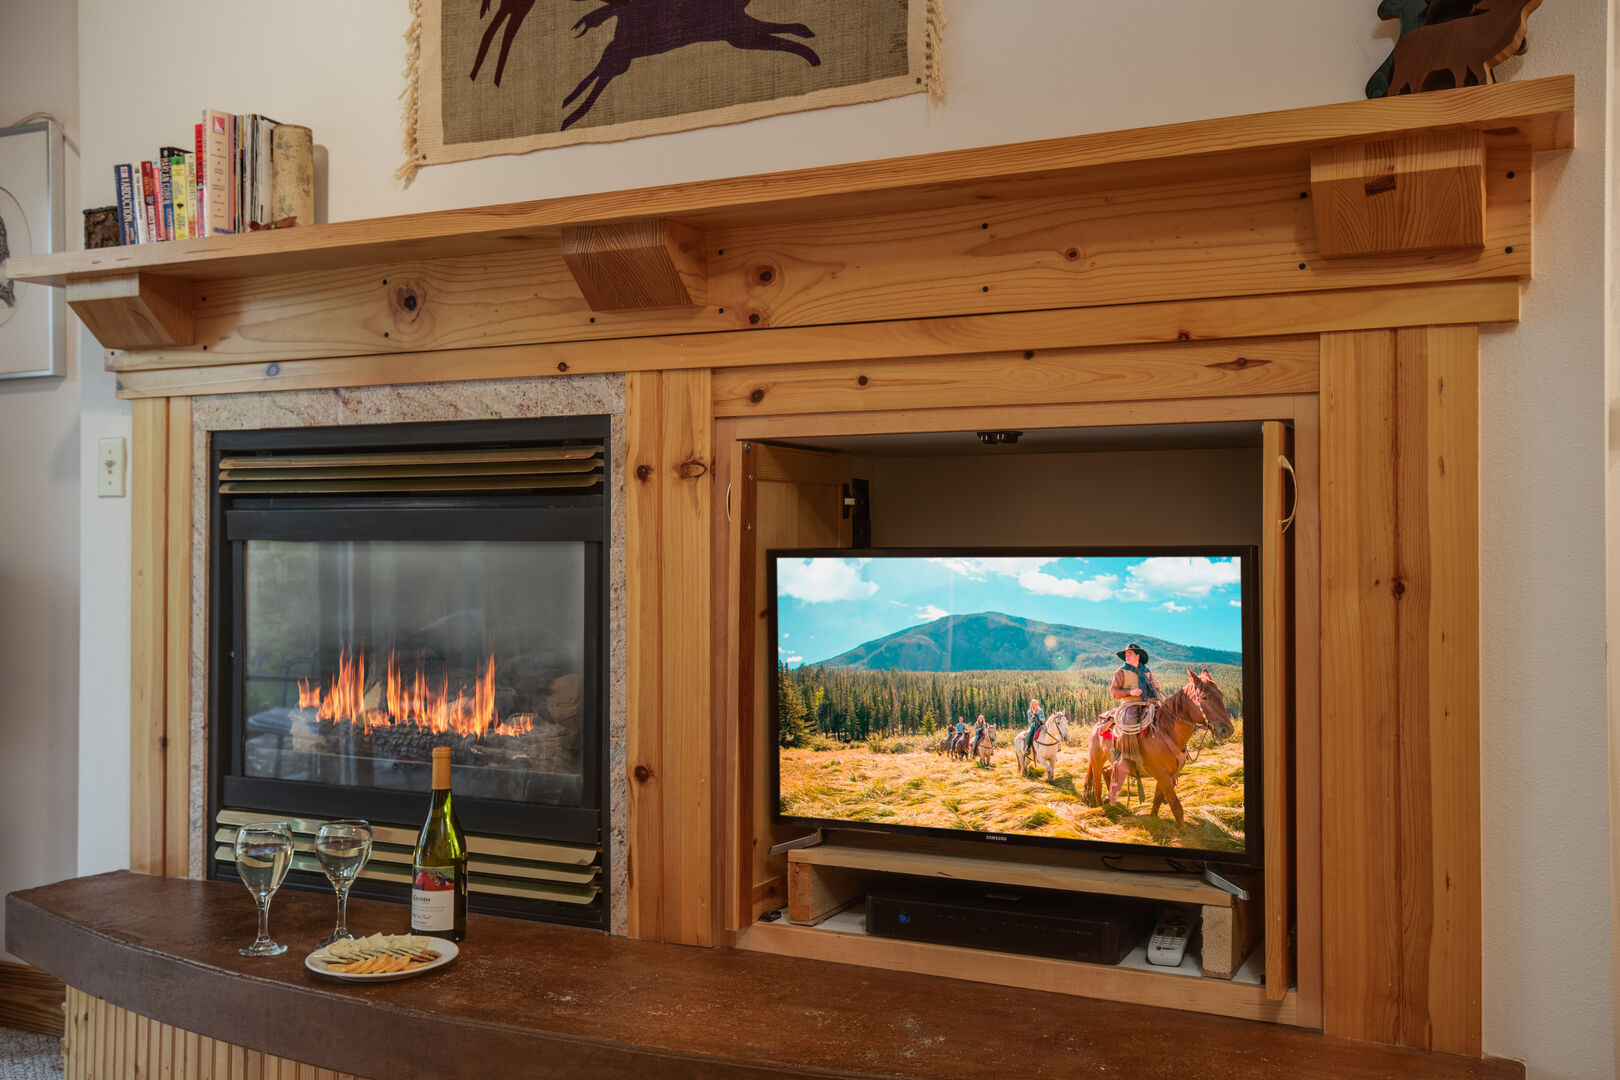 Teton Serenity ~ fireplace ~ function over fashion ~ is a heat source operated by thermostat, NOT an on/off switch